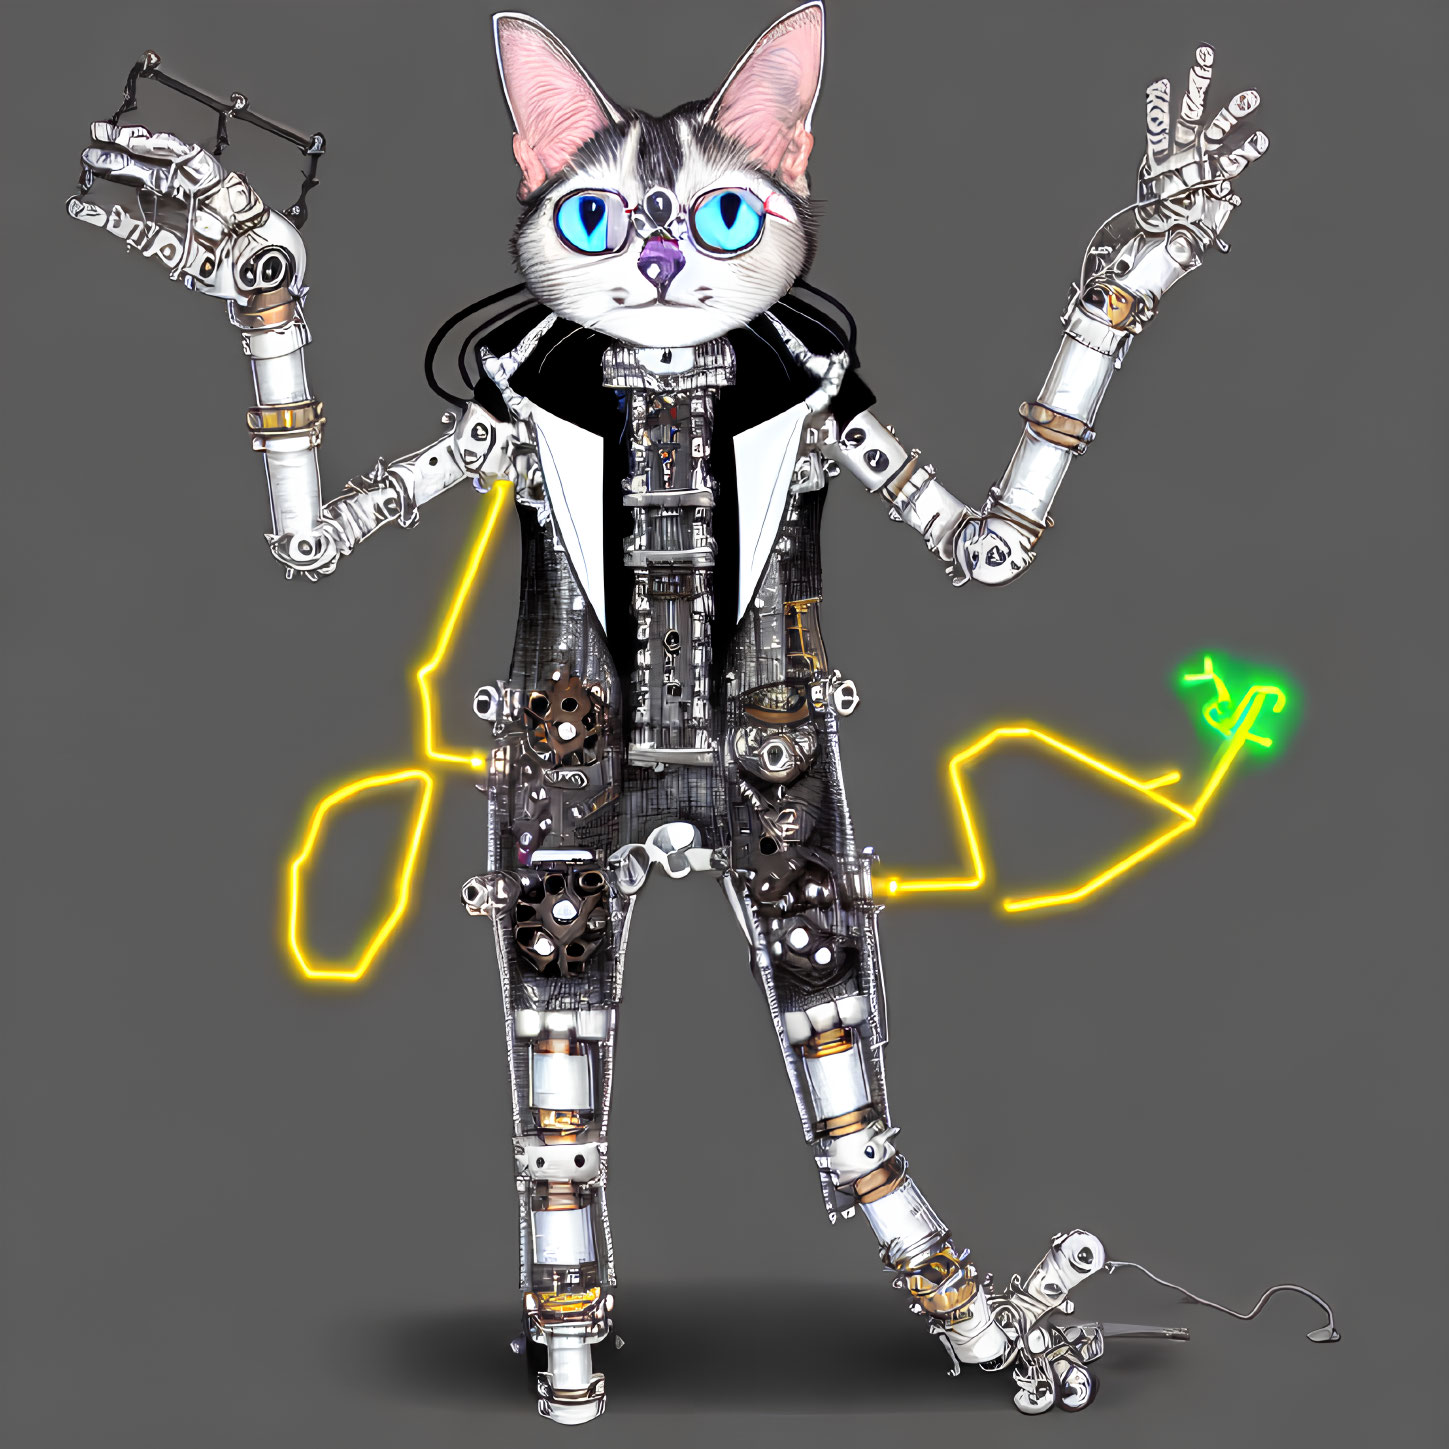 Anthropomorphic cat with mechanical body and neon details holding USB plug